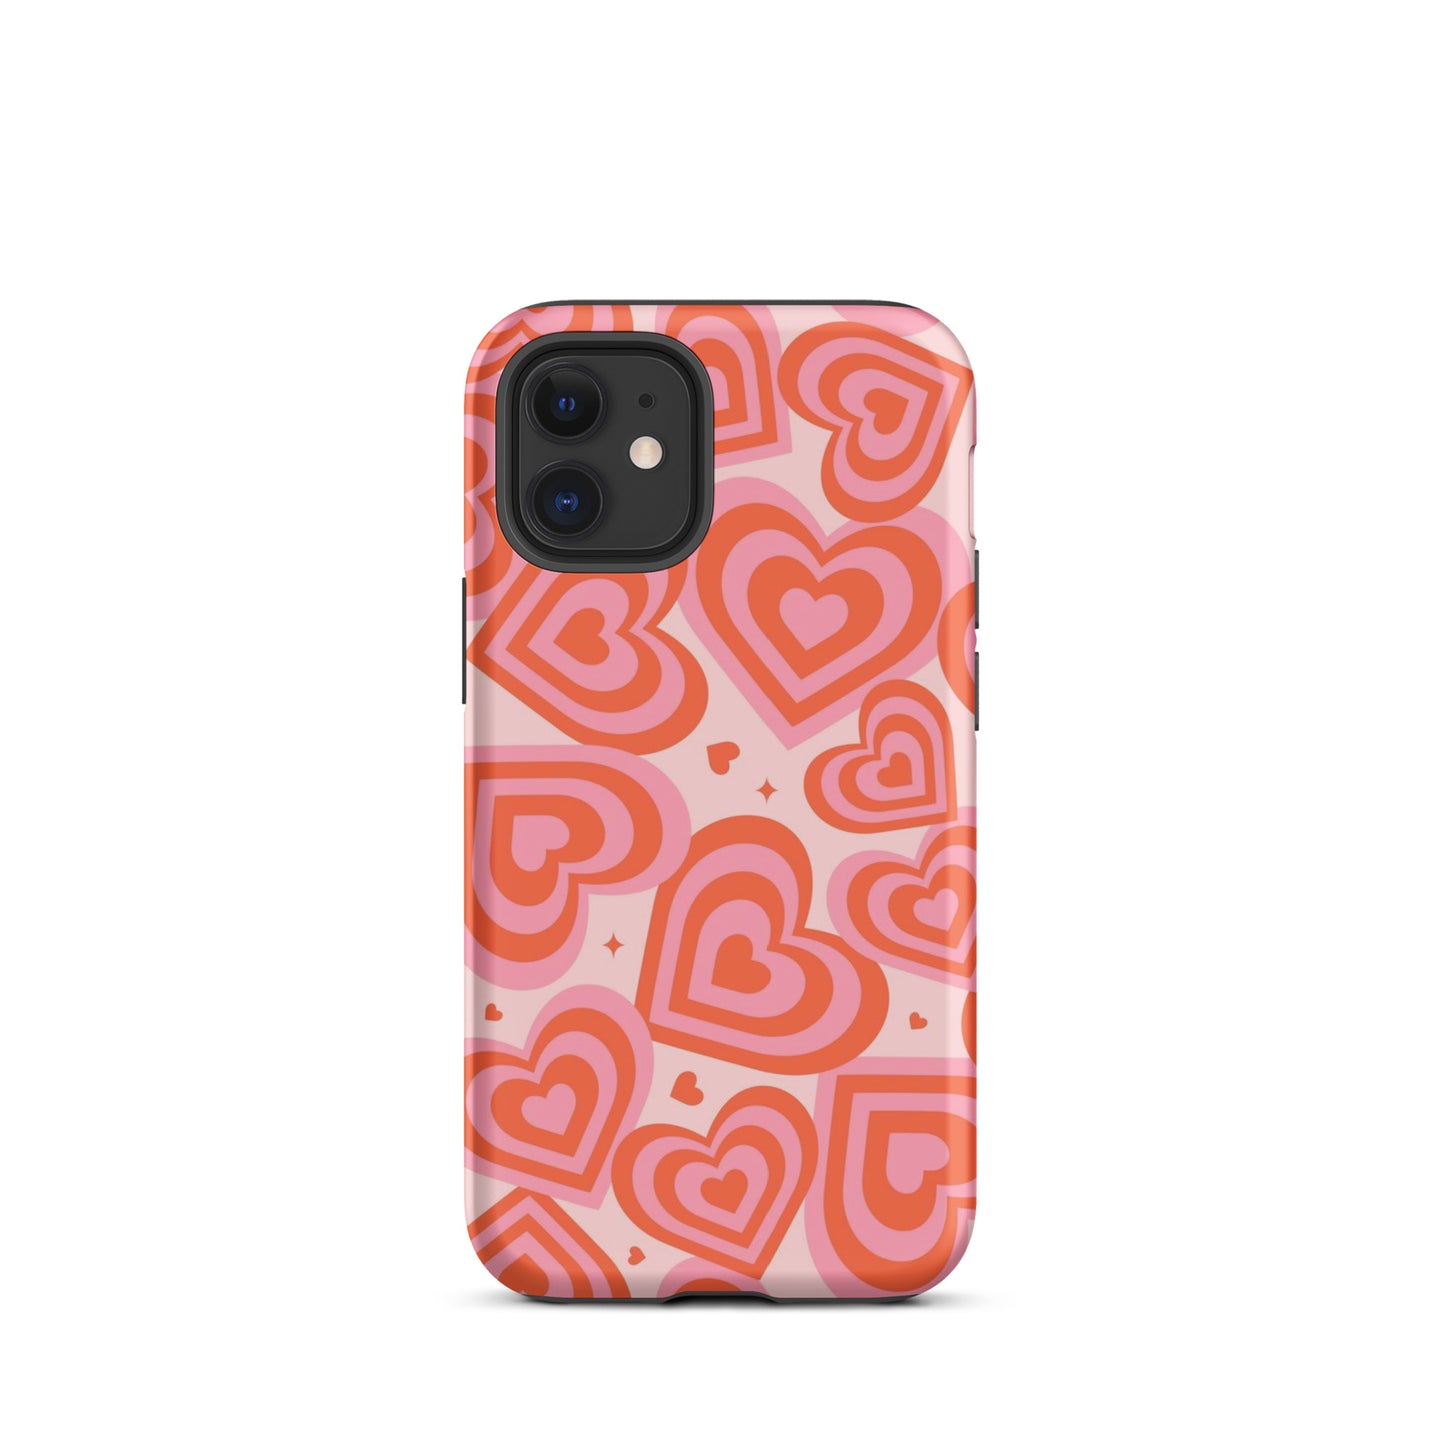 Pink & Red Hearts iPhone Case iPhone 12 mini Matte